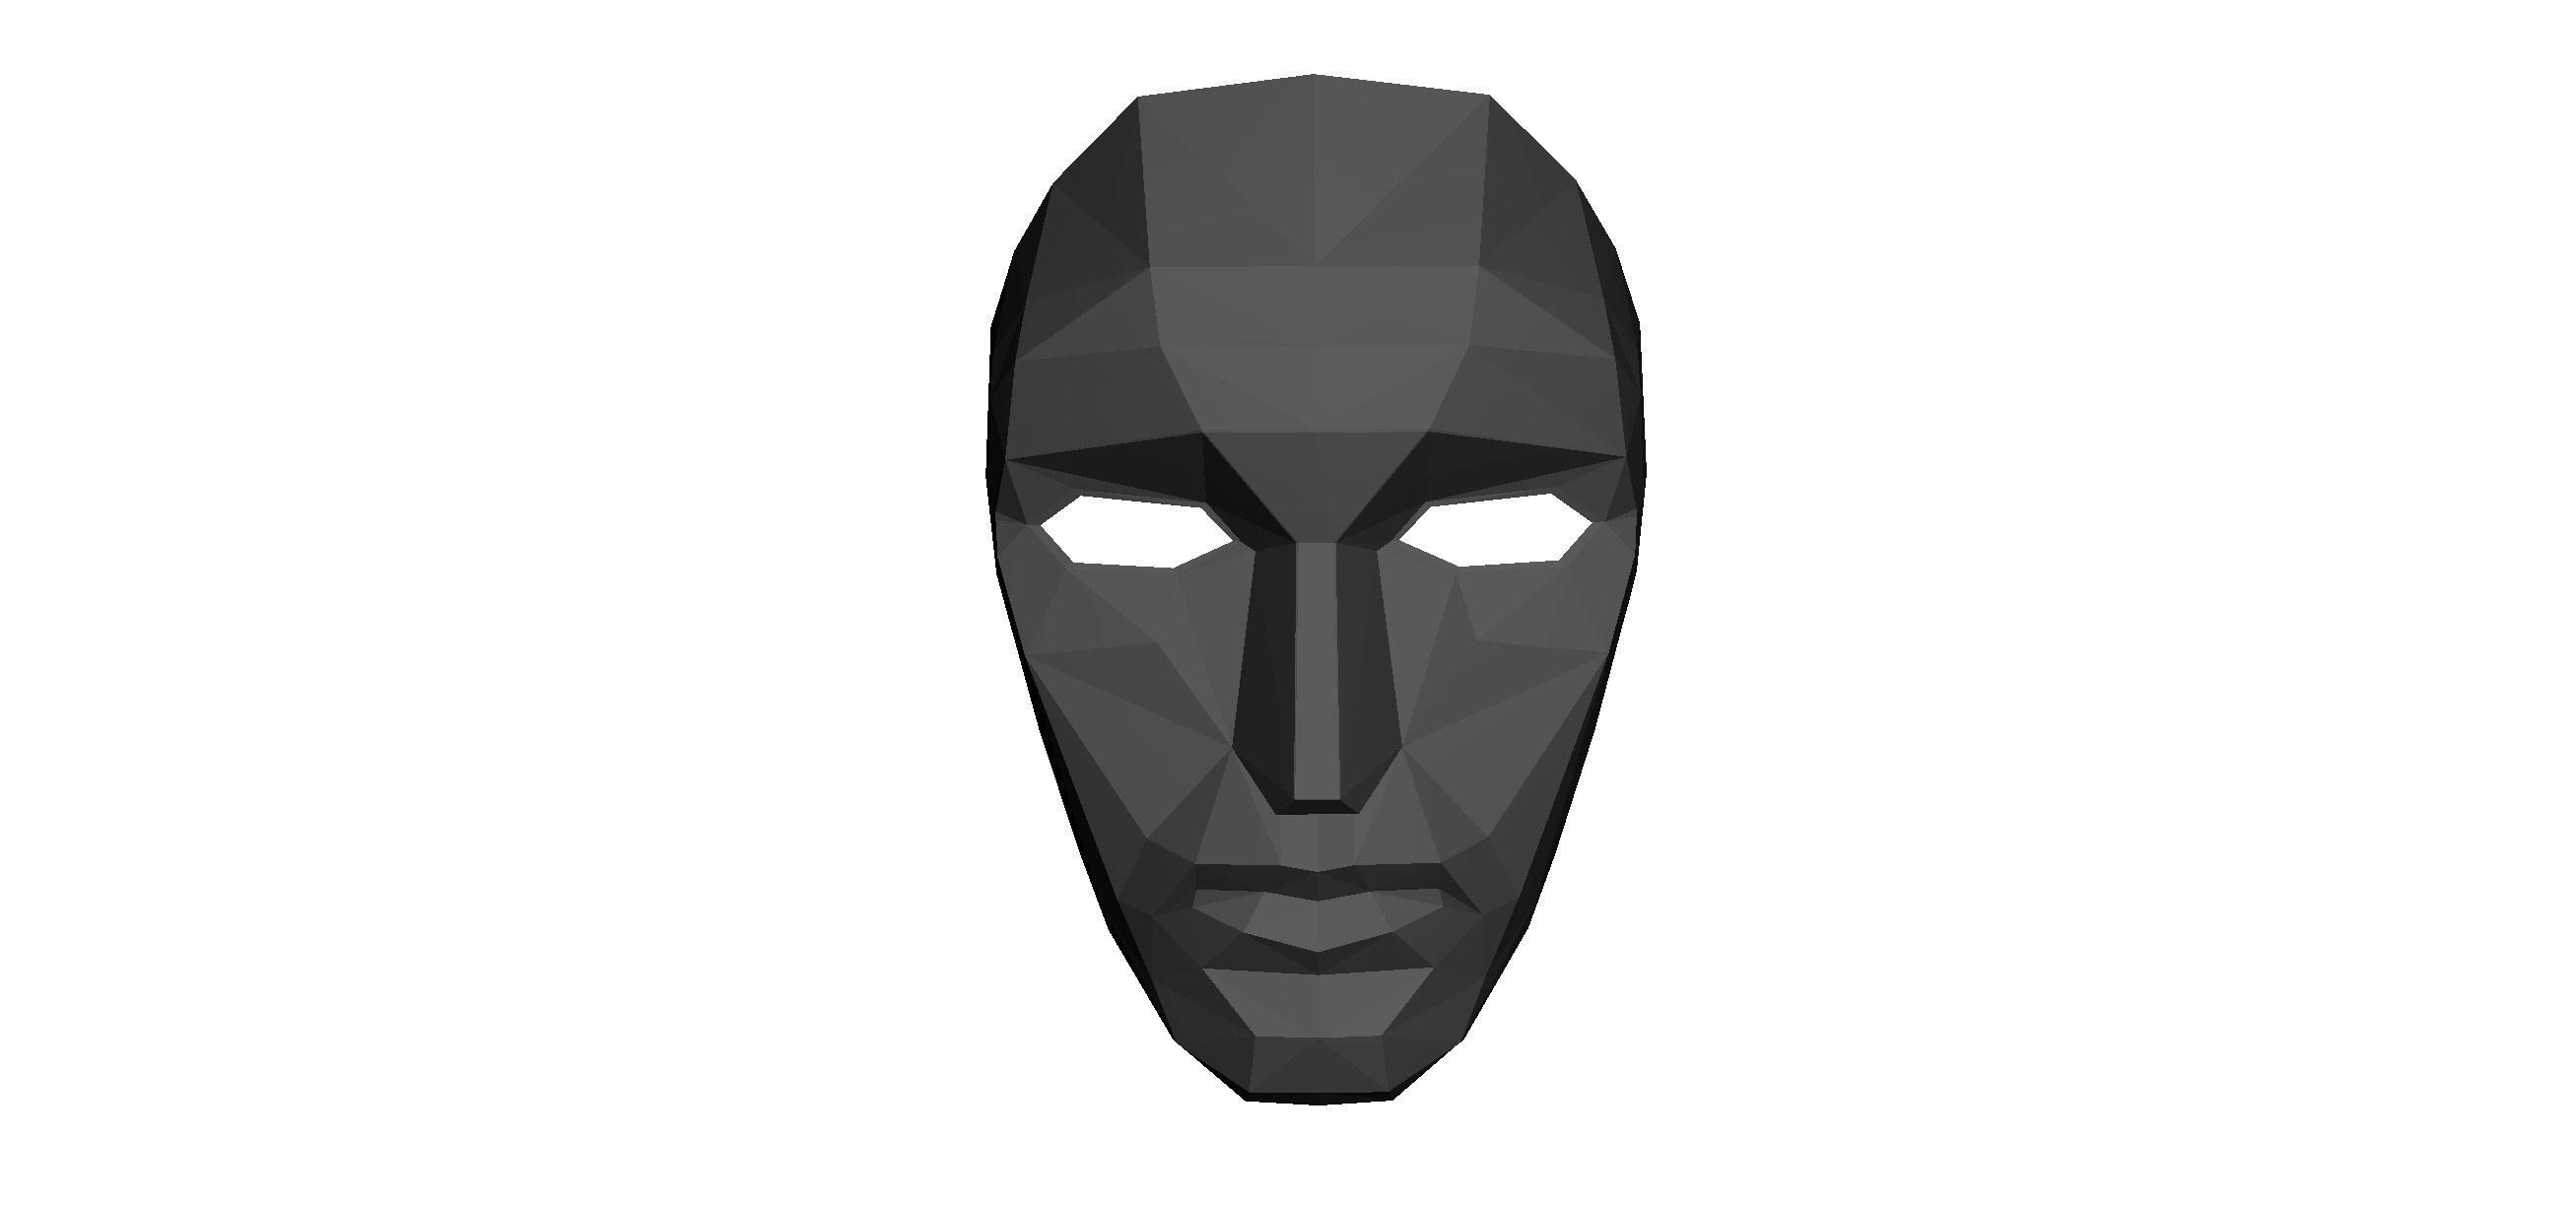 A black colored 3D model of a face with geometric edges across the surface, on a white background